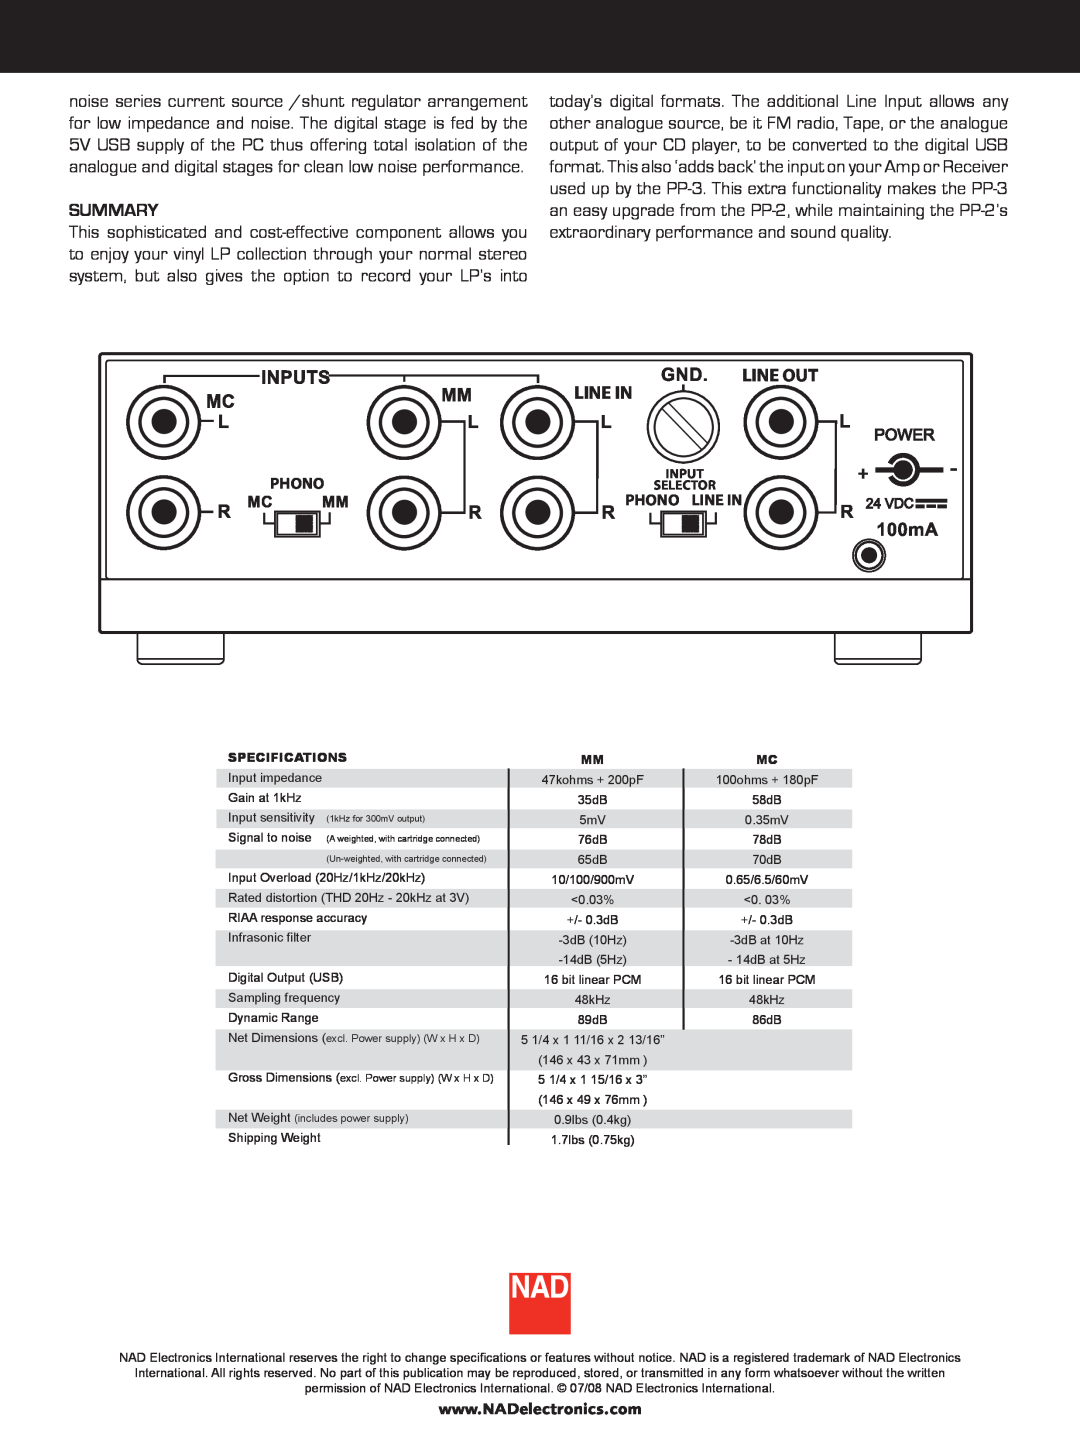 NAD PP-3 manual Summary, Line Out, Phono Line In 